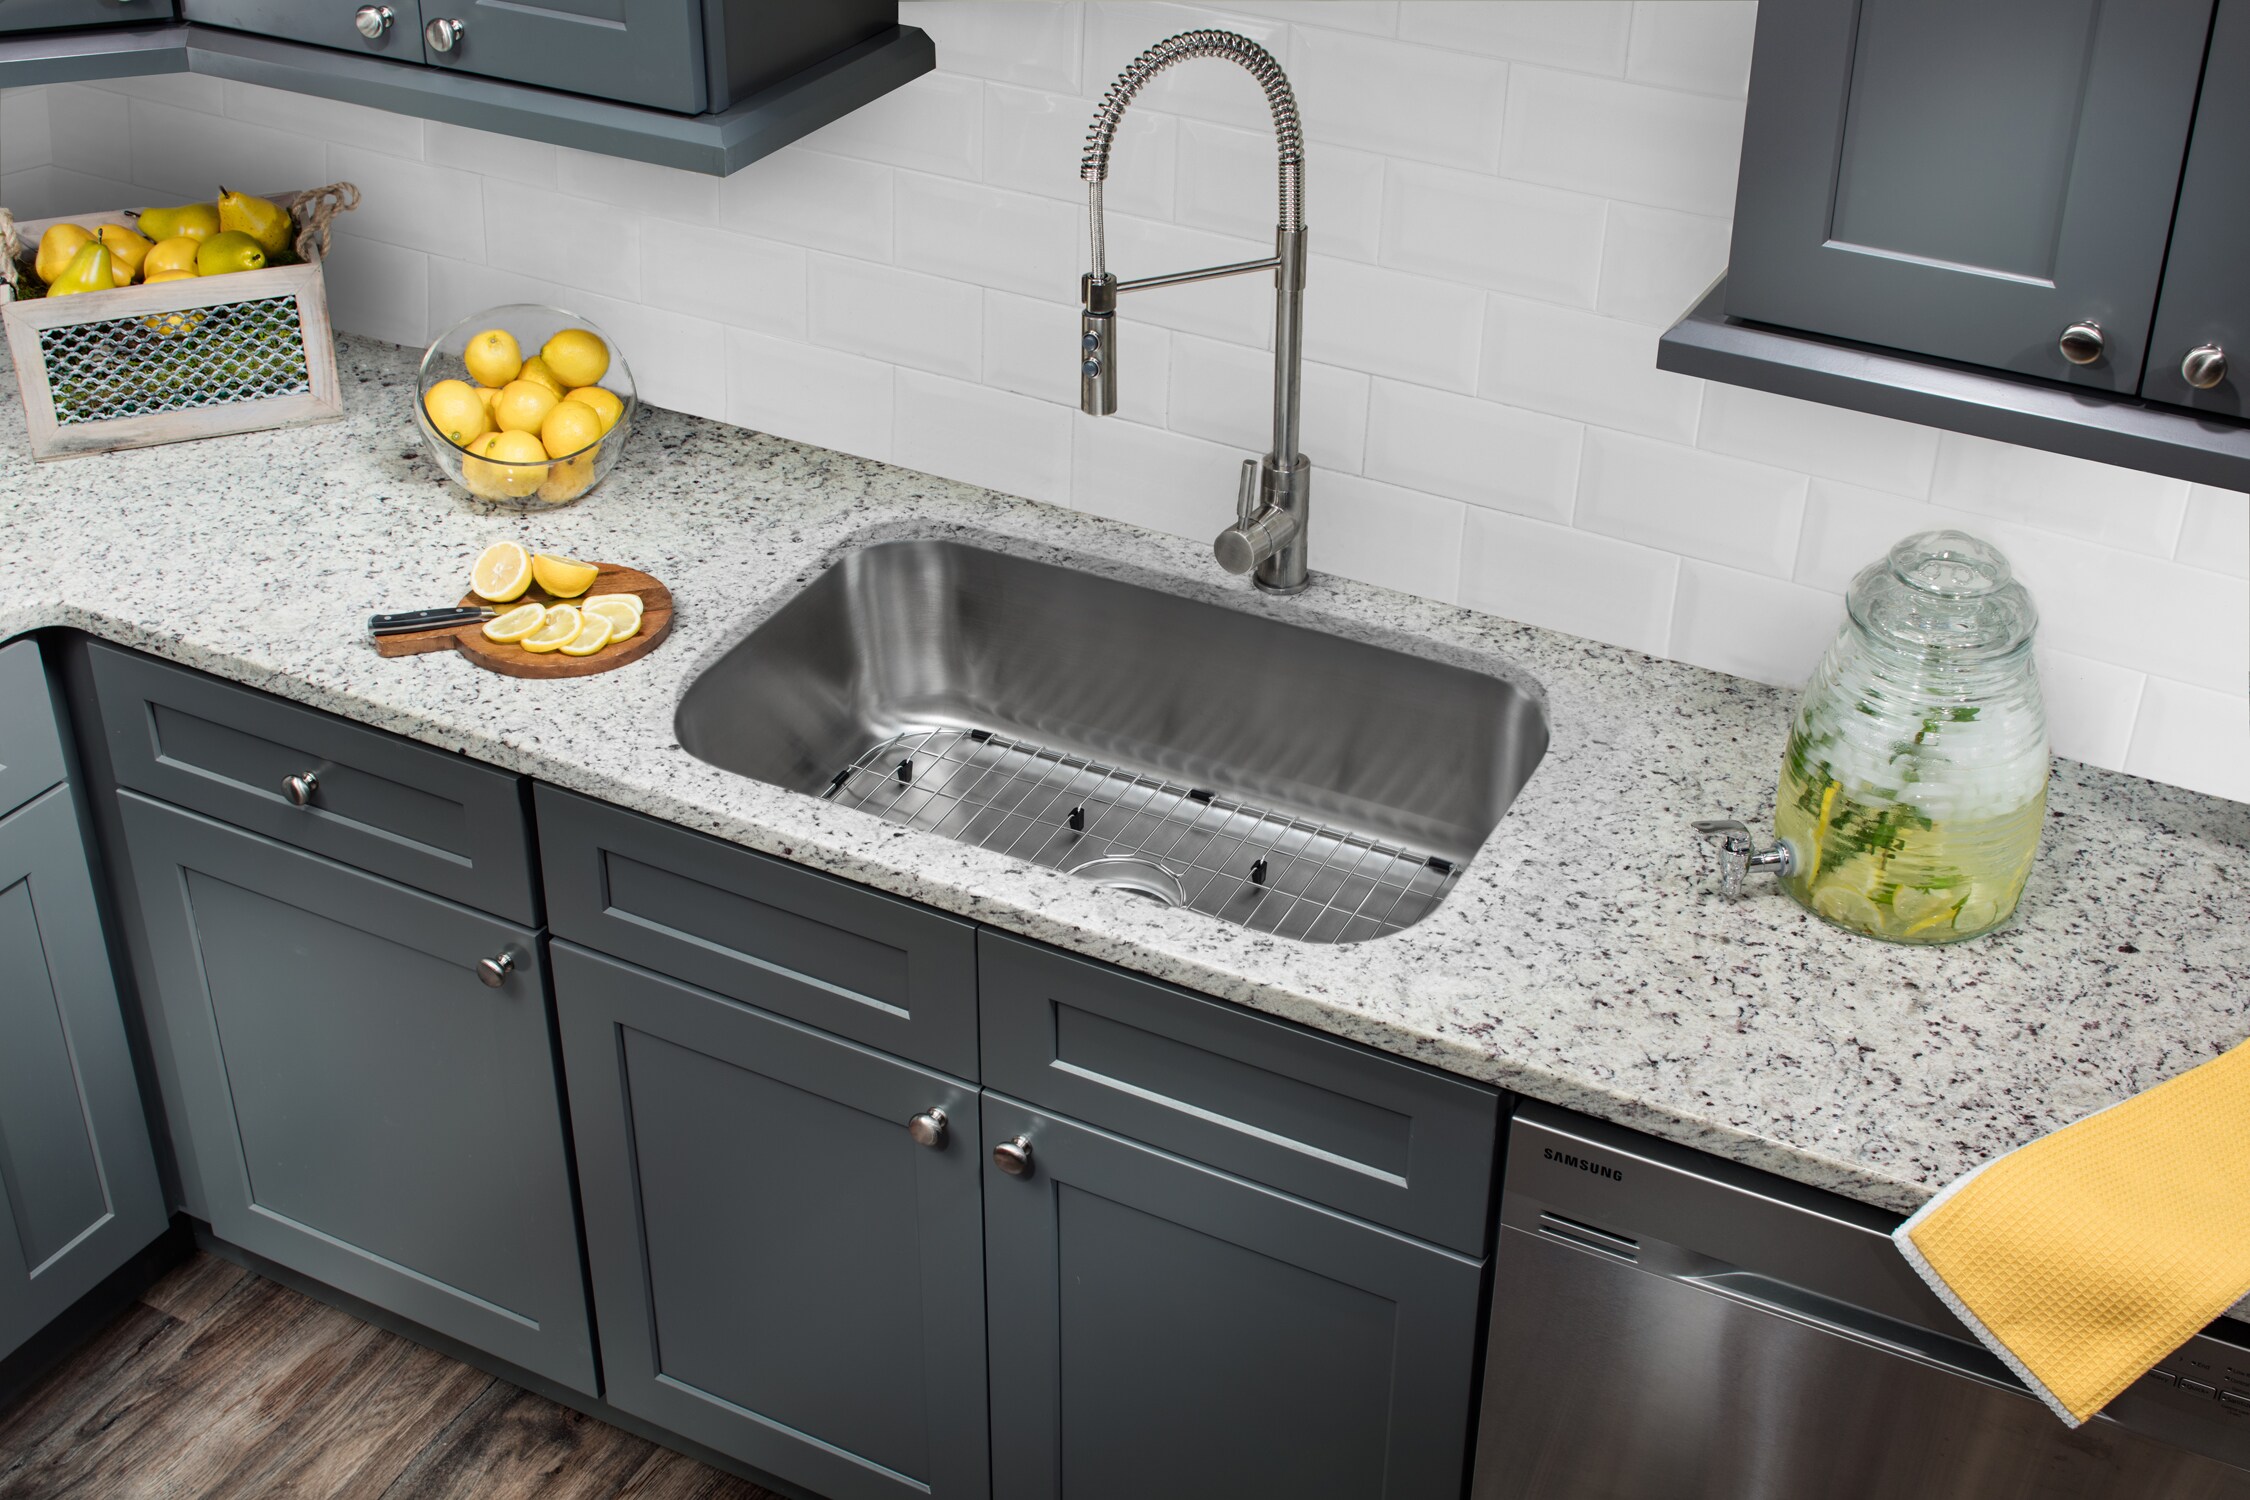 Superior Sinks Undermount 30.5-in x 18.25-in Brushed Satin Single Bowl Stainless Steel Kitchen Sink